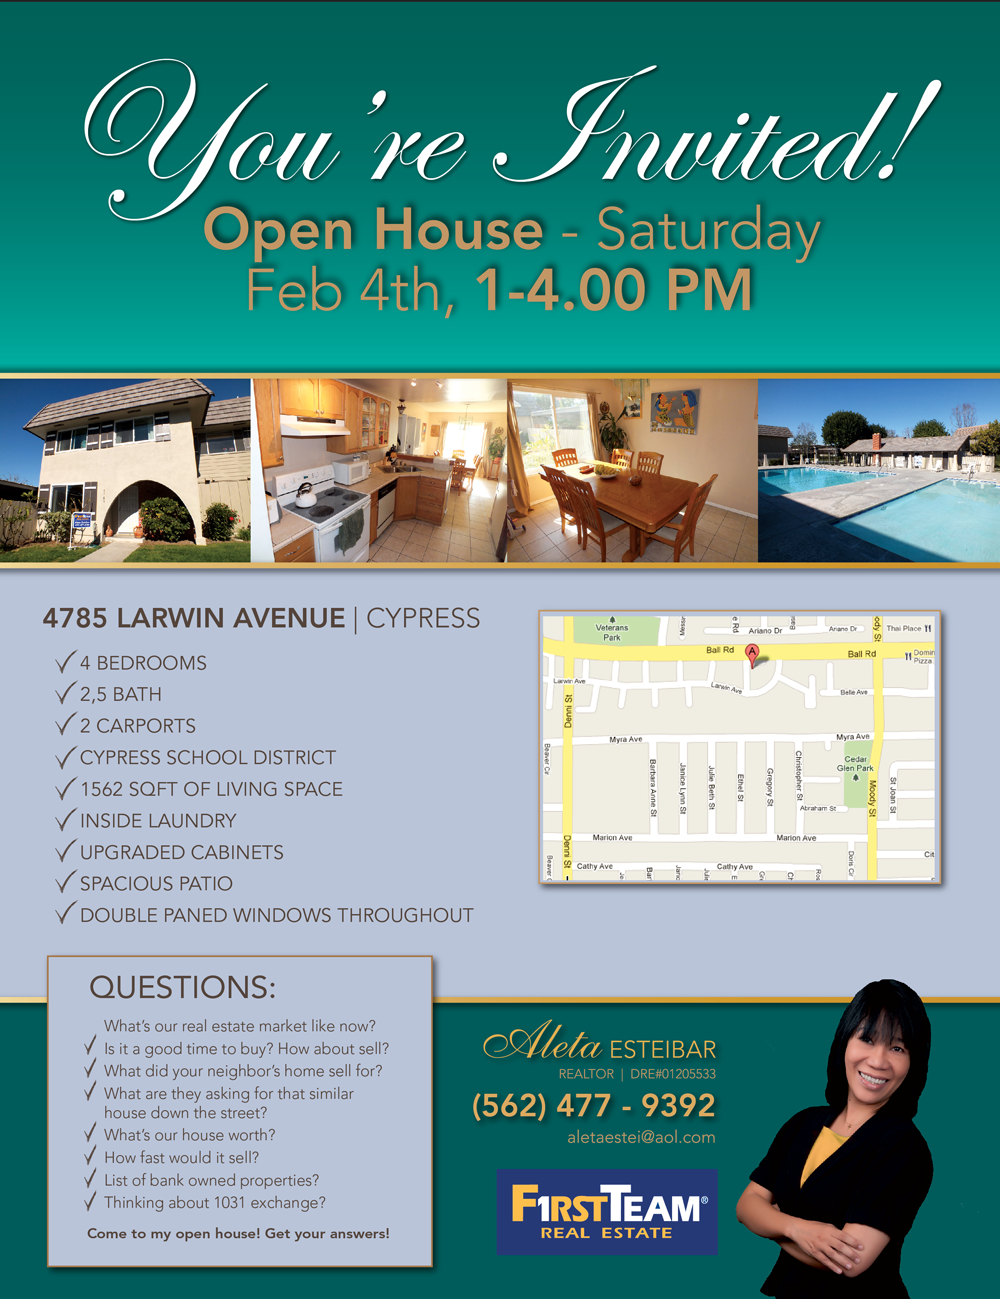 7th guest open house